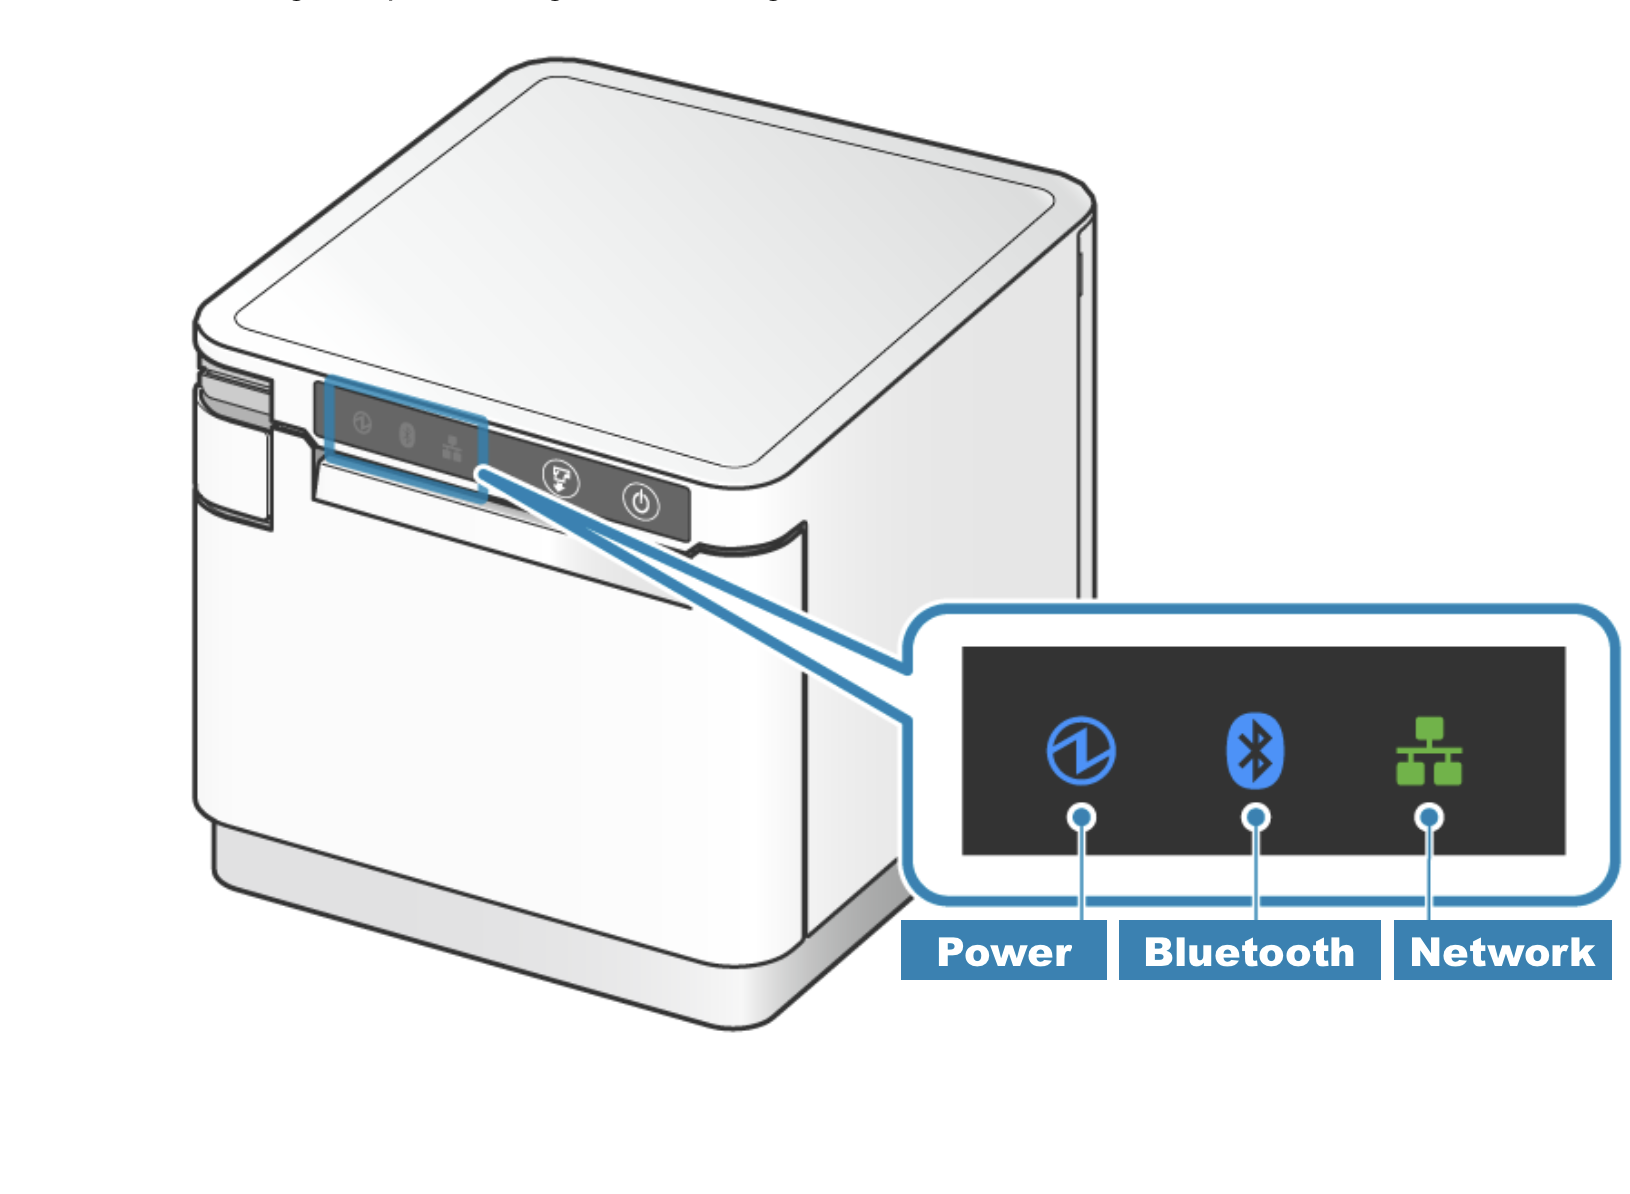 Star mC-Print 3 light codes with Power, Bluetooth, and Network lights indicated